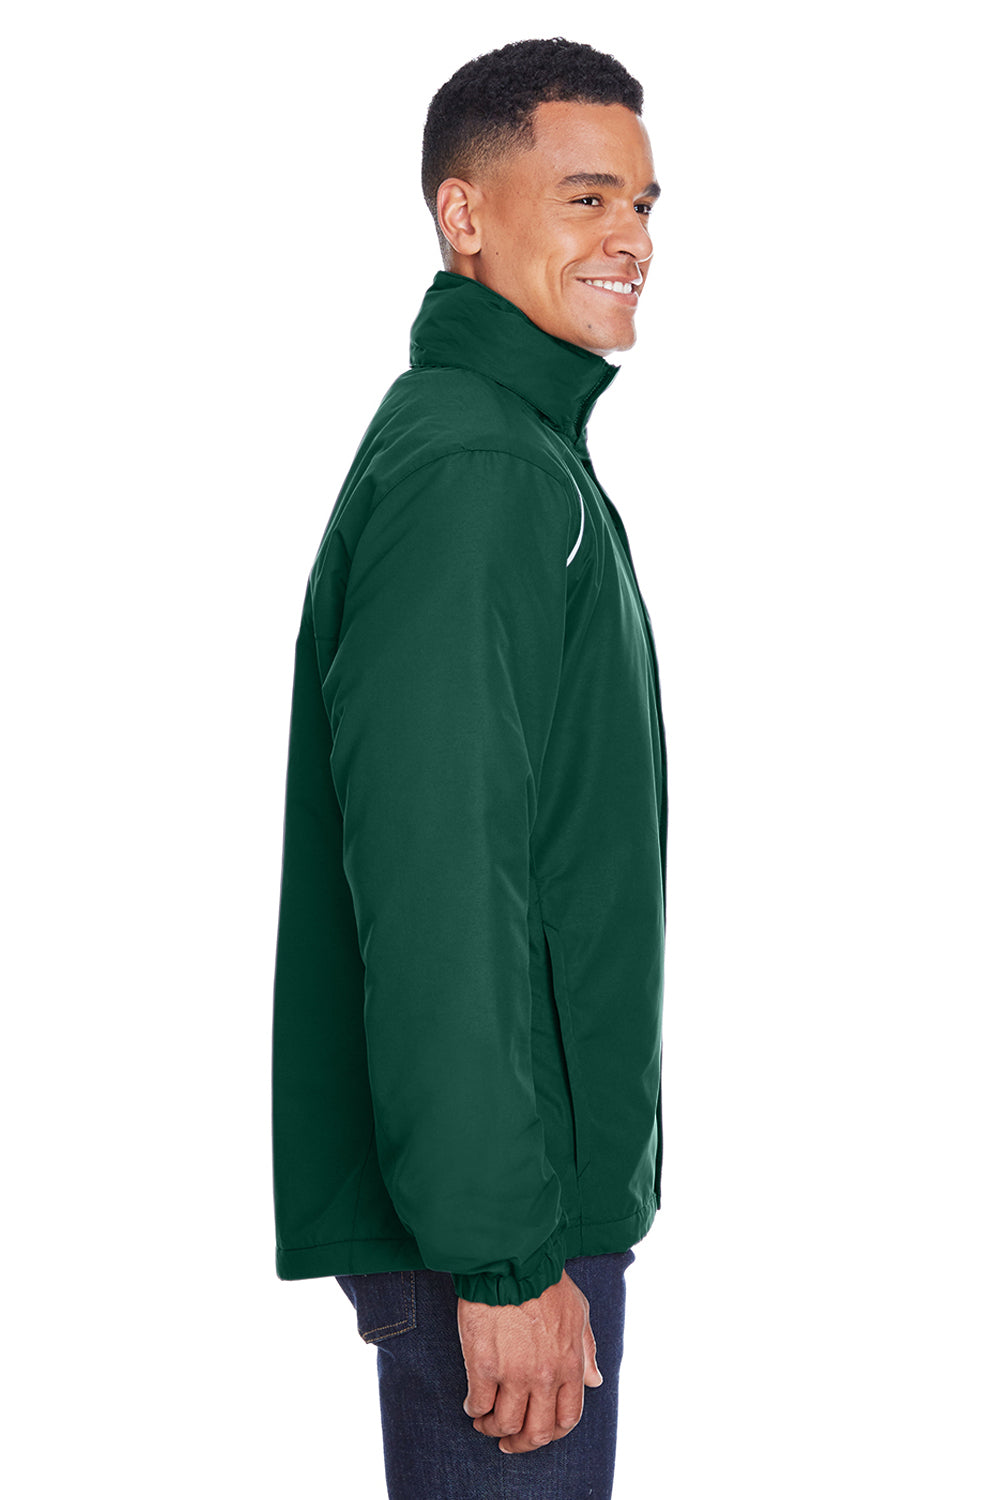 Core 365 88224 Mens Profile Water Resistant Full Zip Hooded Jacket Forest Green Side